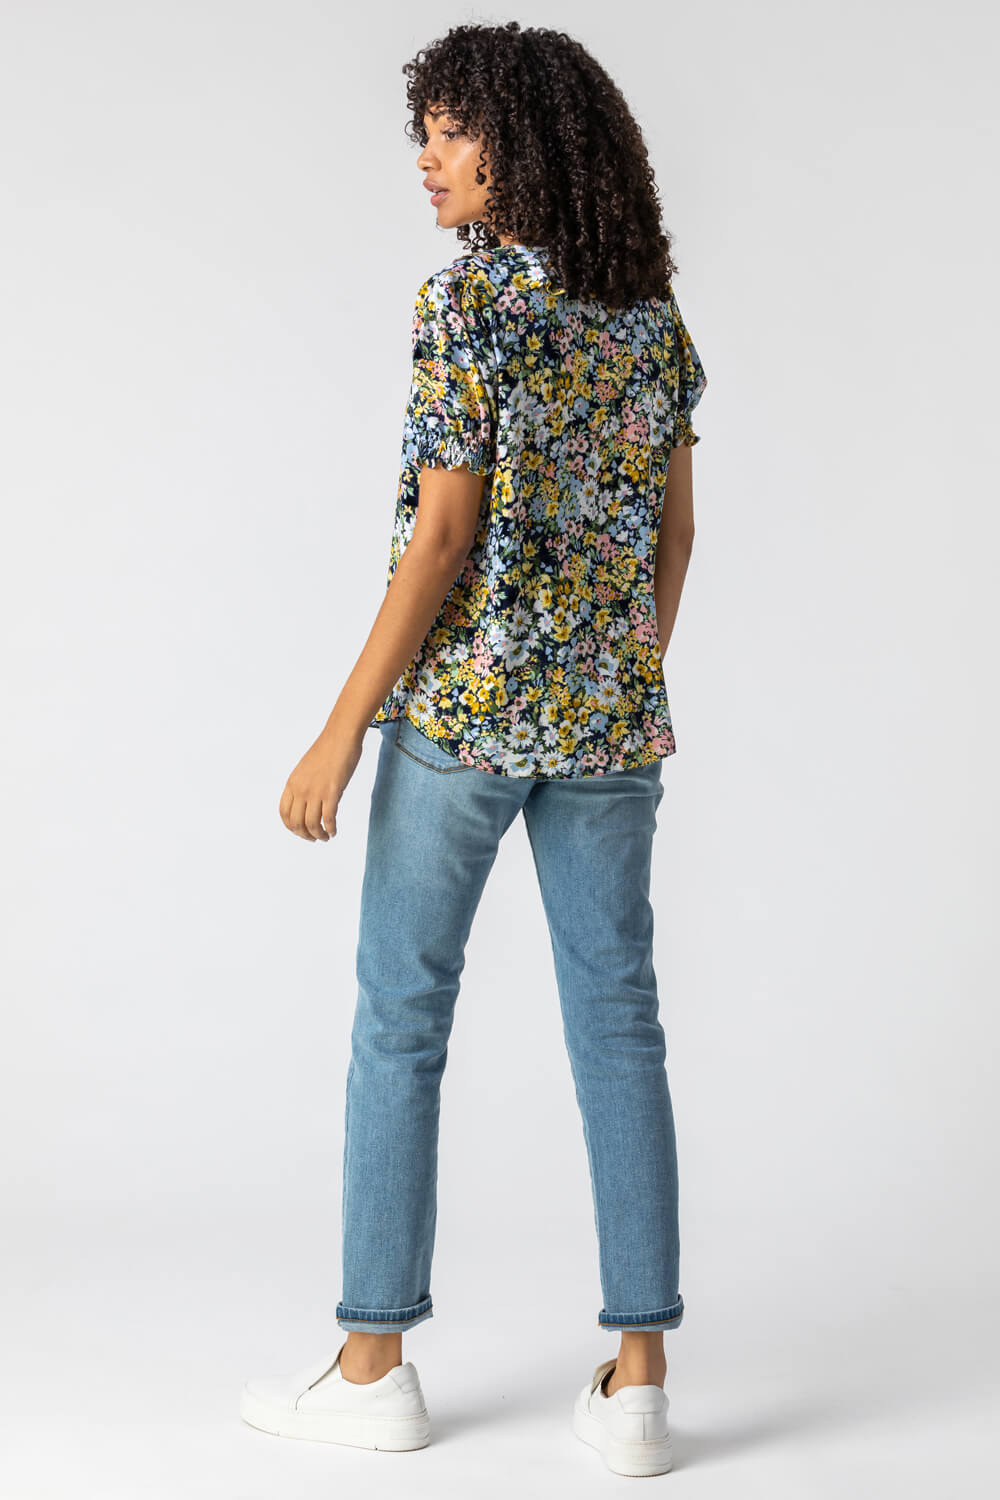 Blue Floral Print Frill Detail Blouse, Image 2 of 5